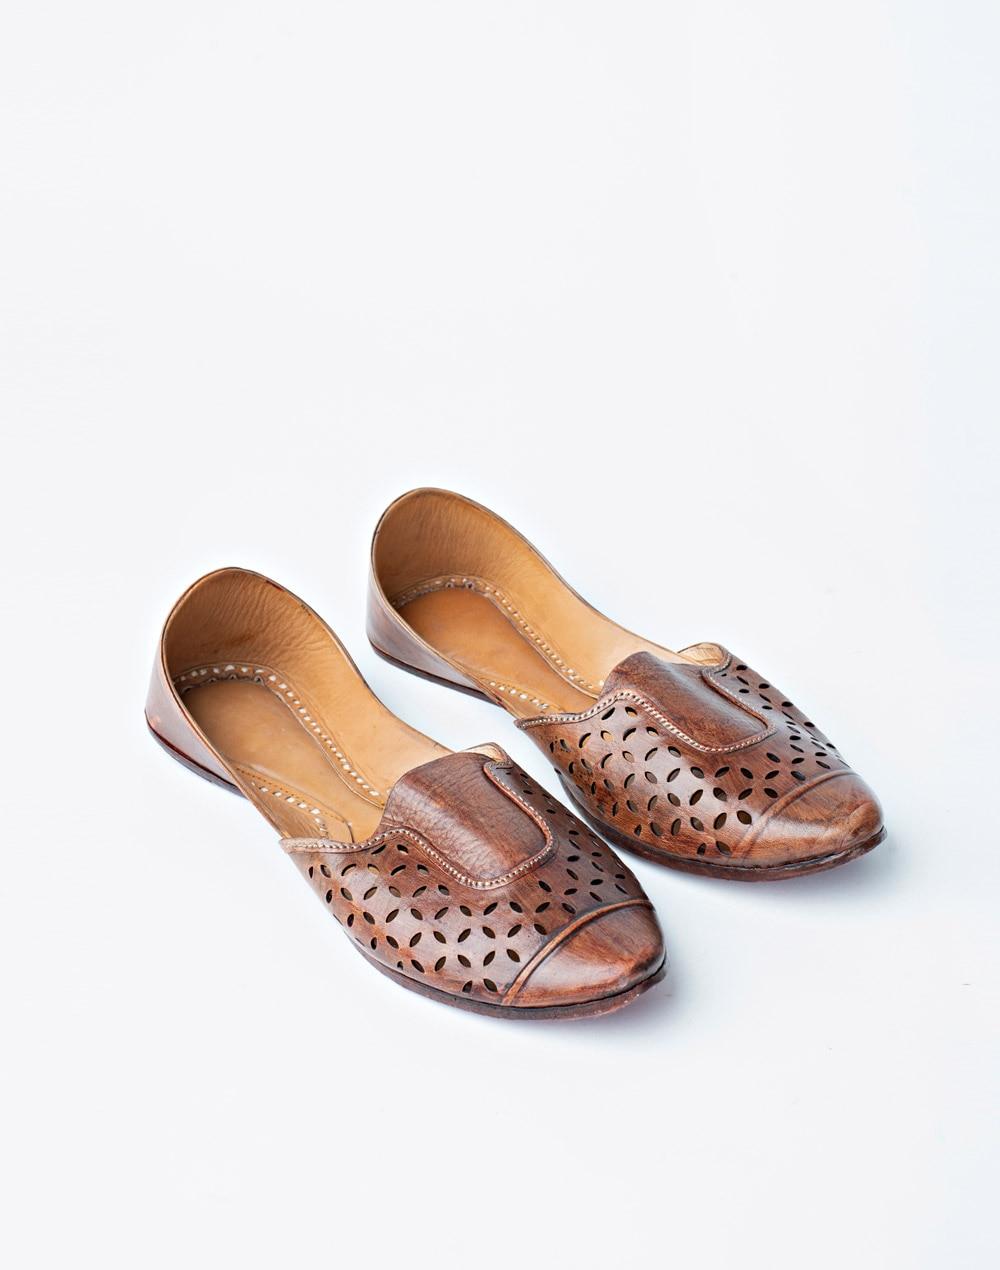 leather perforated juttie